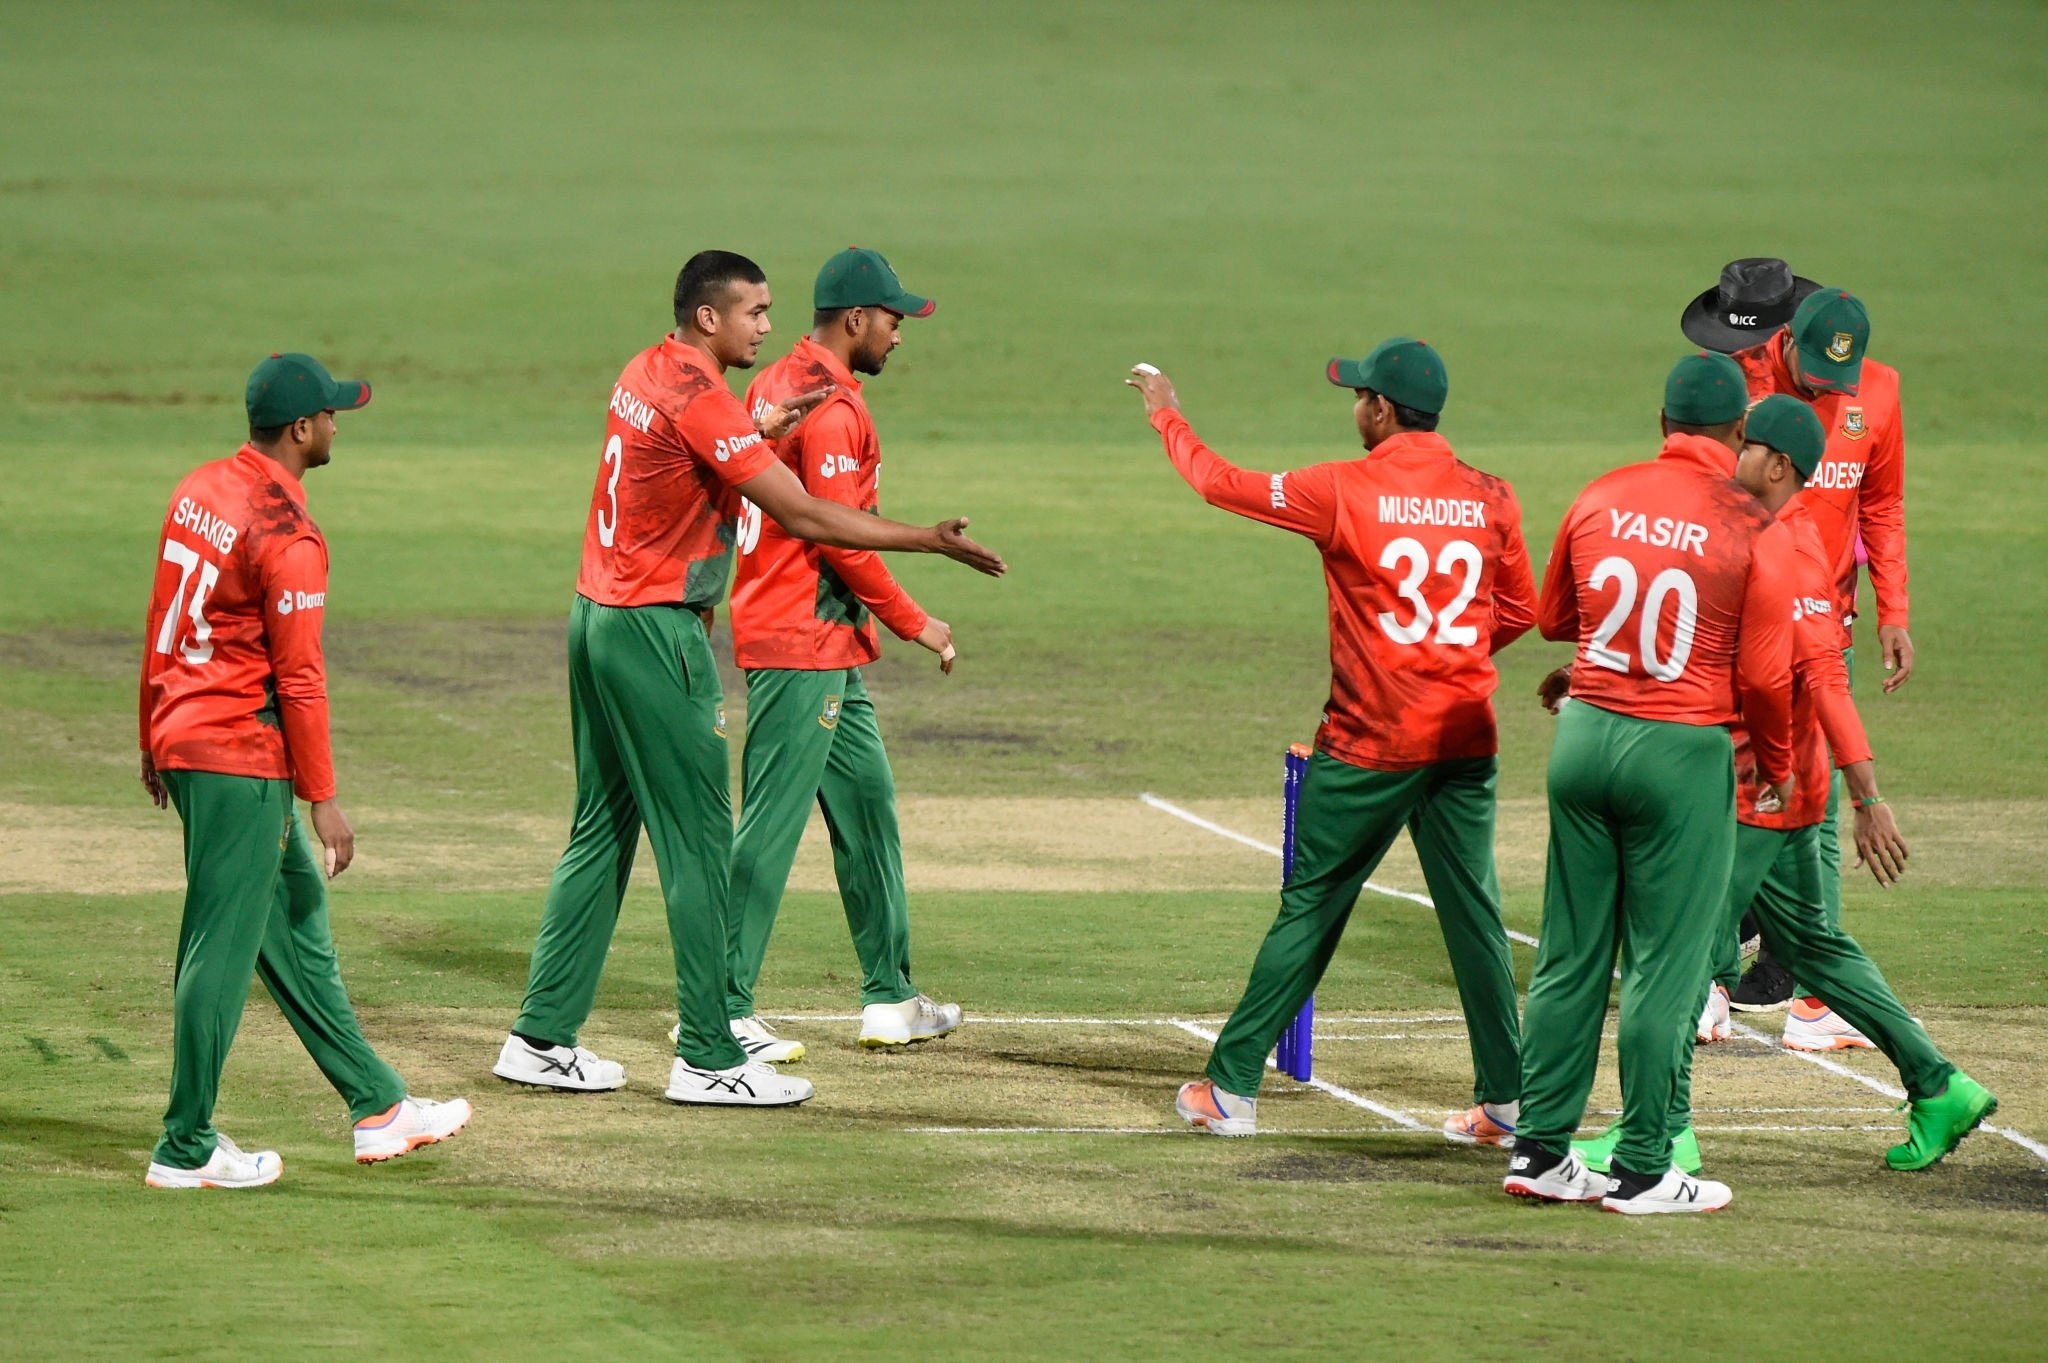 BAN vs NED Live Streaming, ICC T20 World Cup 2022, Bangladesh vs Netherlands LIVE, T20 WC LIVE Streaming, BAN vs NED Live Broadcast, BAN vs NED Live Score